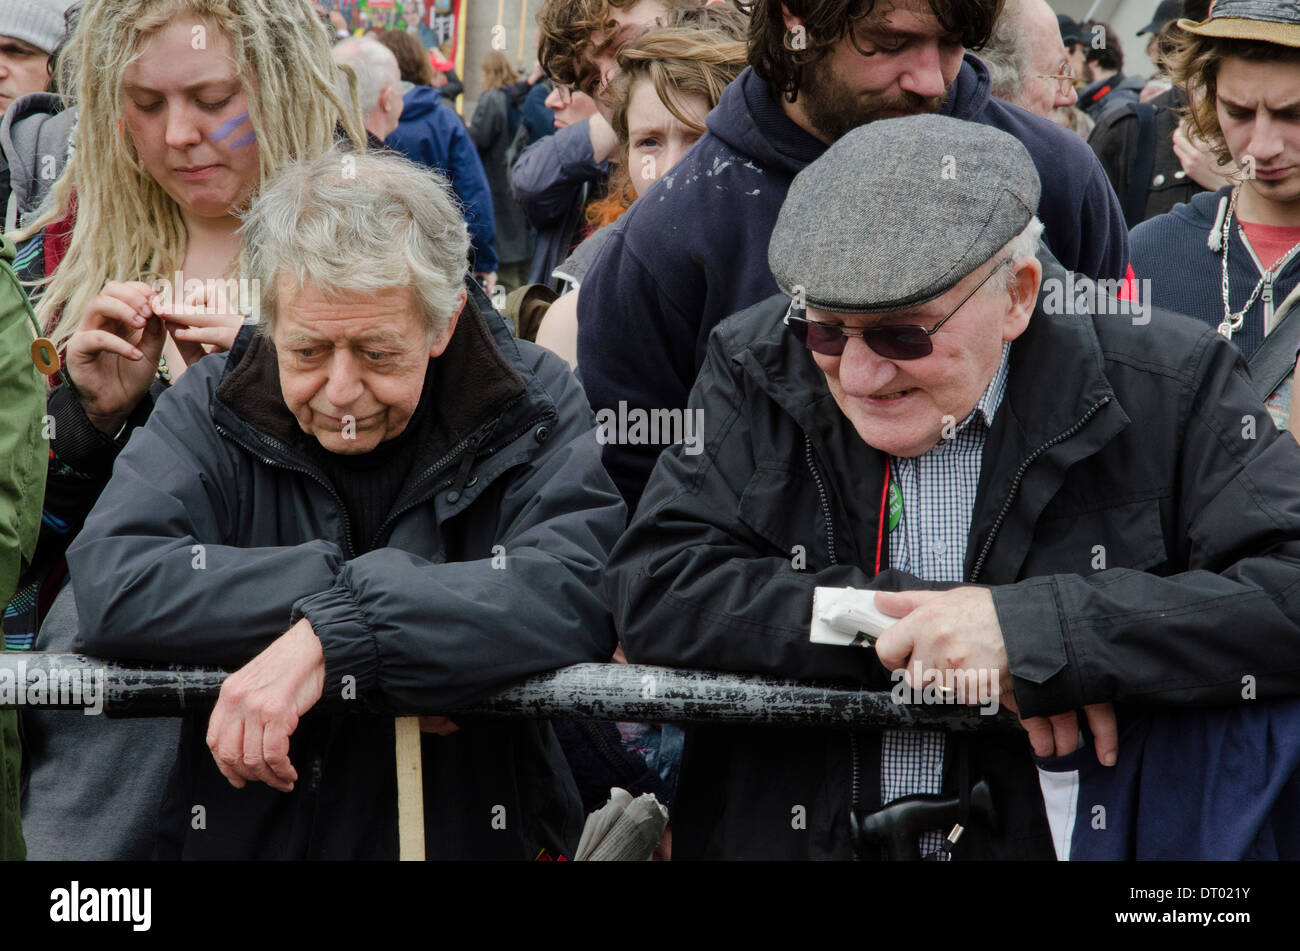 TWO ELDERLY MAN LOOKING DOWN AND CHATTING DURING THE PUBLIC SPENDING CUTS DEMO IN TRAFALGAR SQUARE Stock Photo